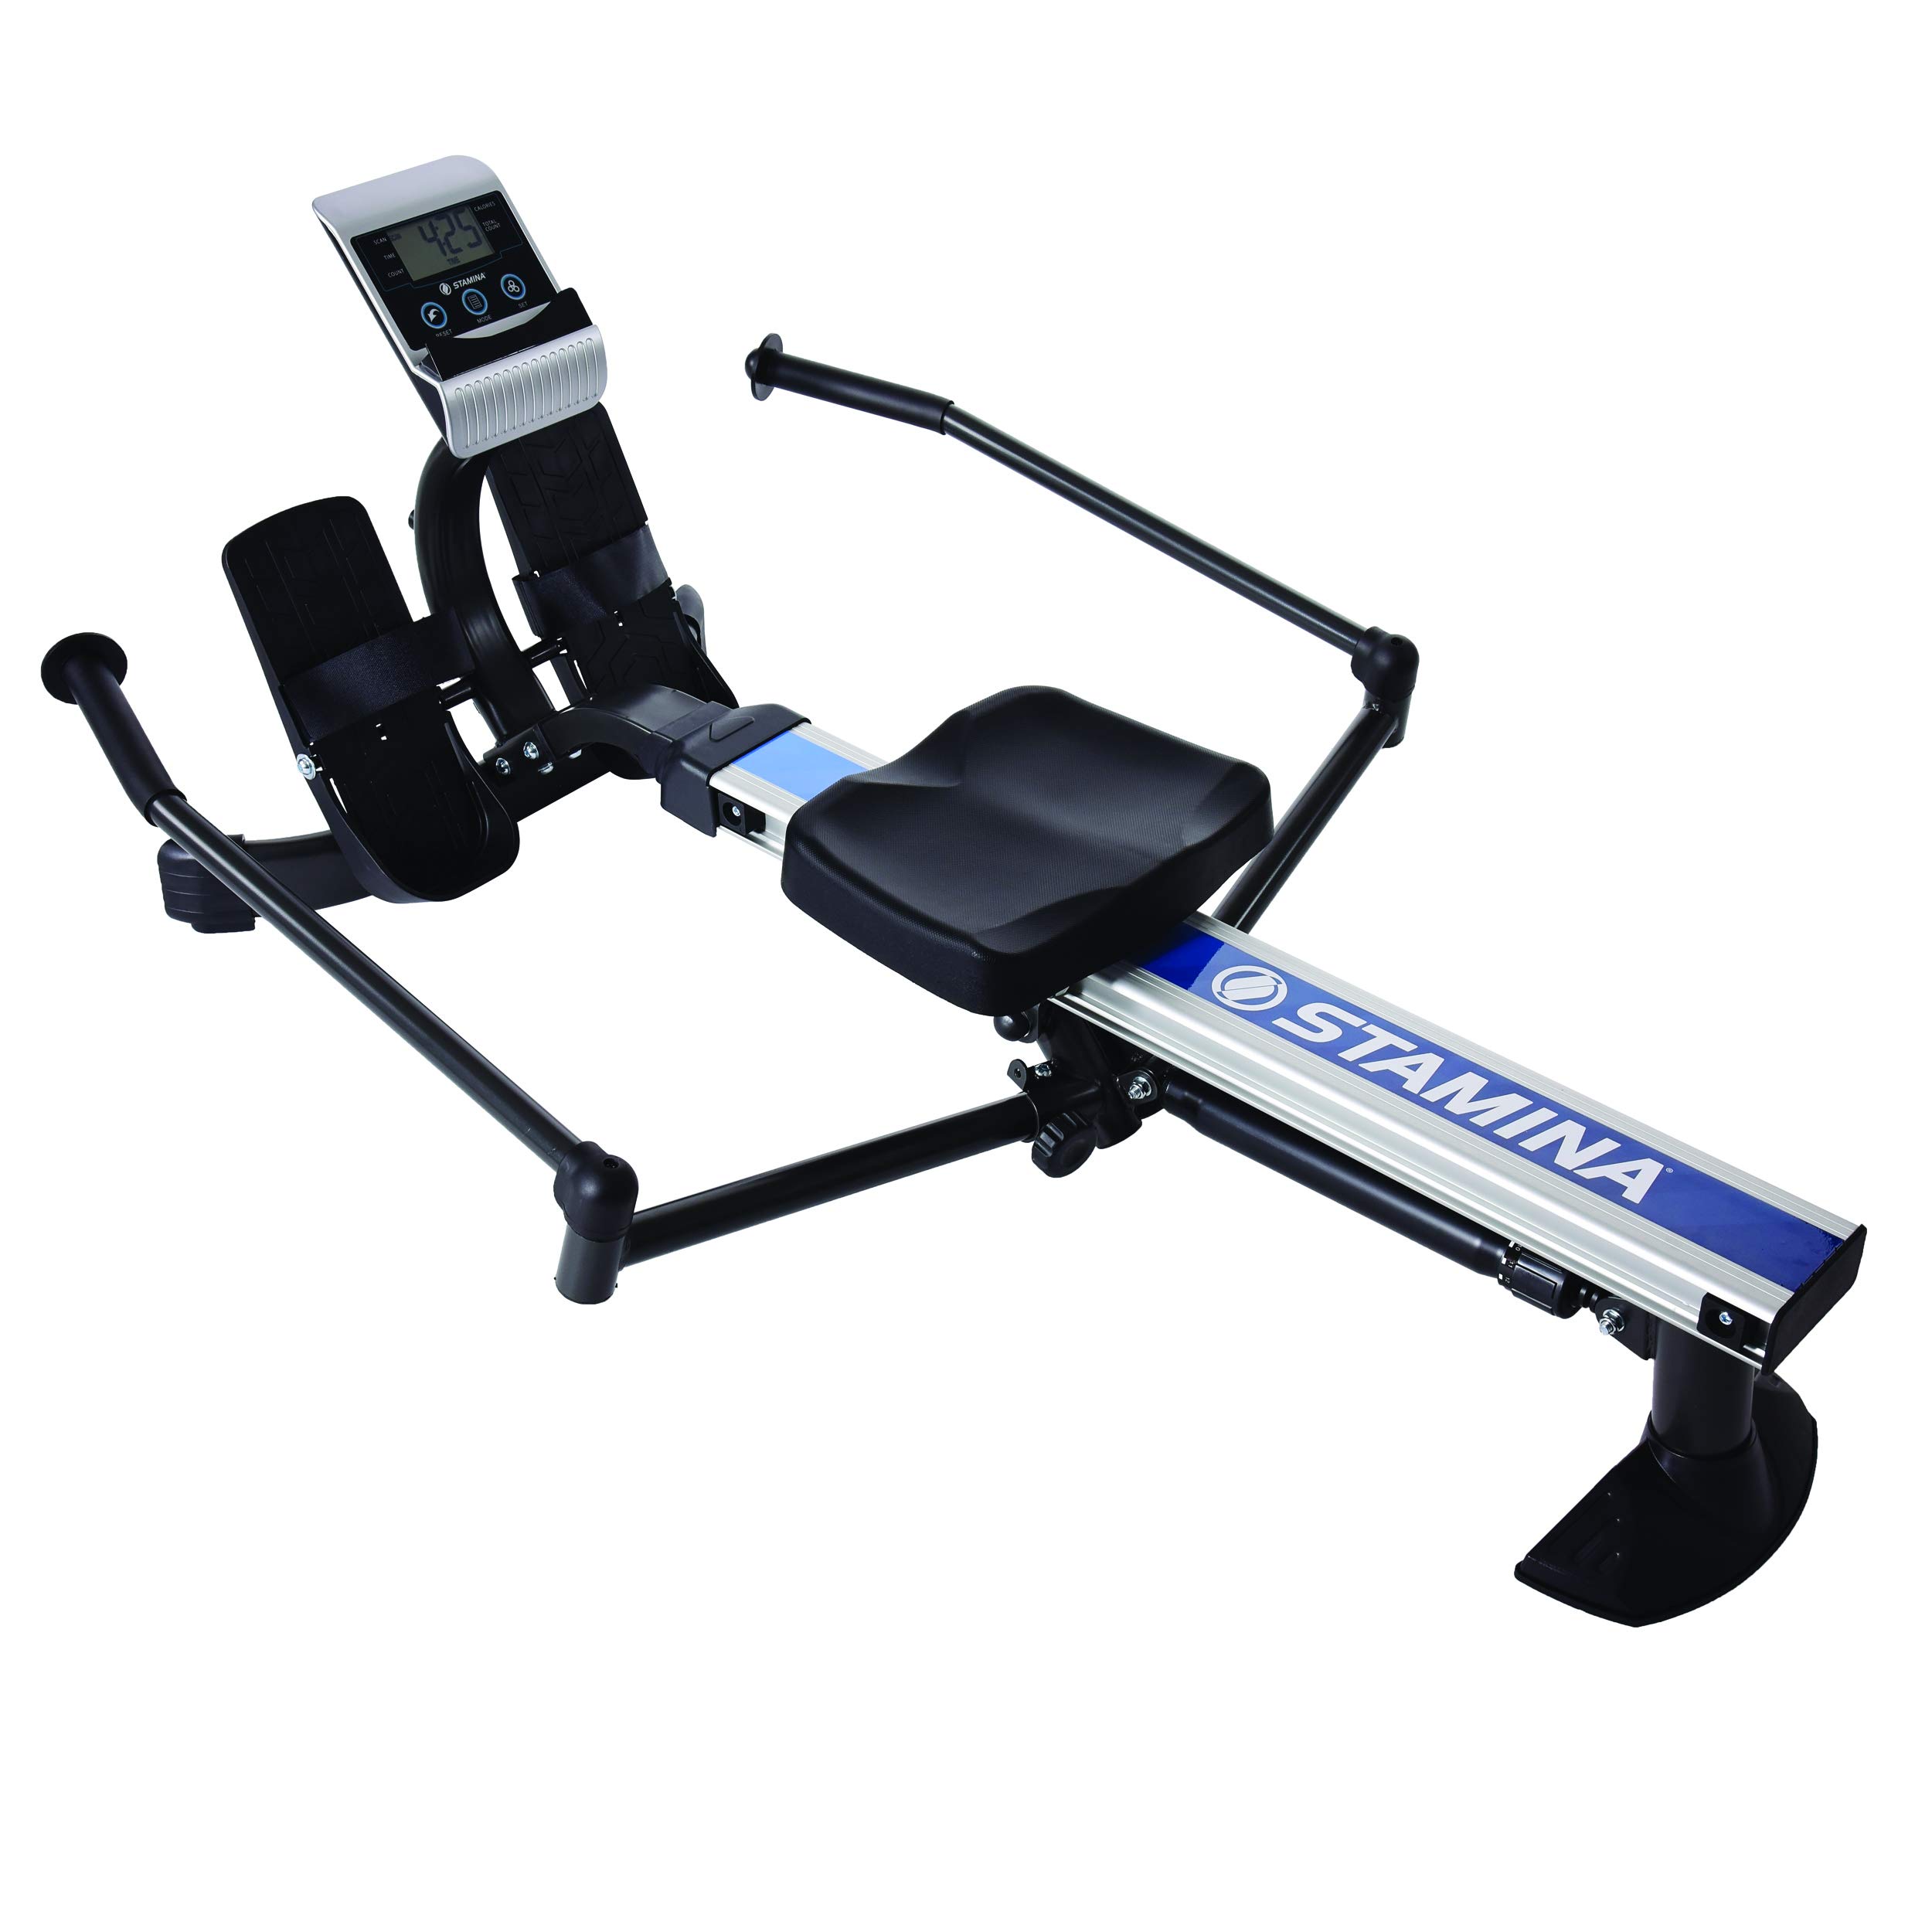 Stamina BodyTrac glider Pro Hydraulic Rowing Machine - compact, Portable, Folding Rower wSmart Workout App, No Subscription Requ